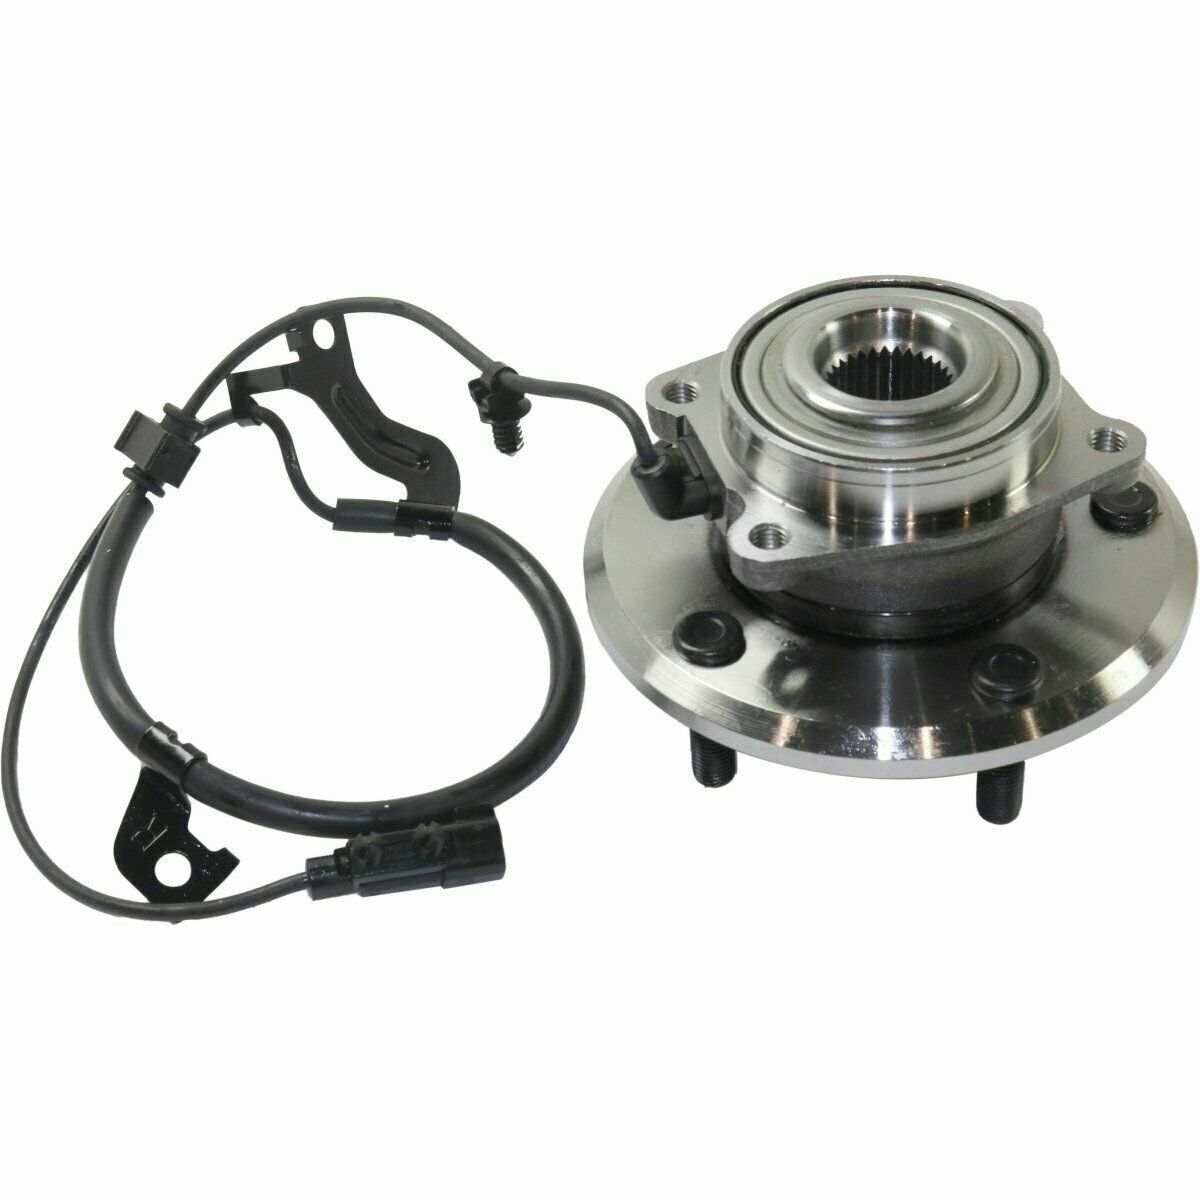 JADODE Rear Left and Right Wheel Bearing & Hub Assembly for Dodge Journey 2009-2018